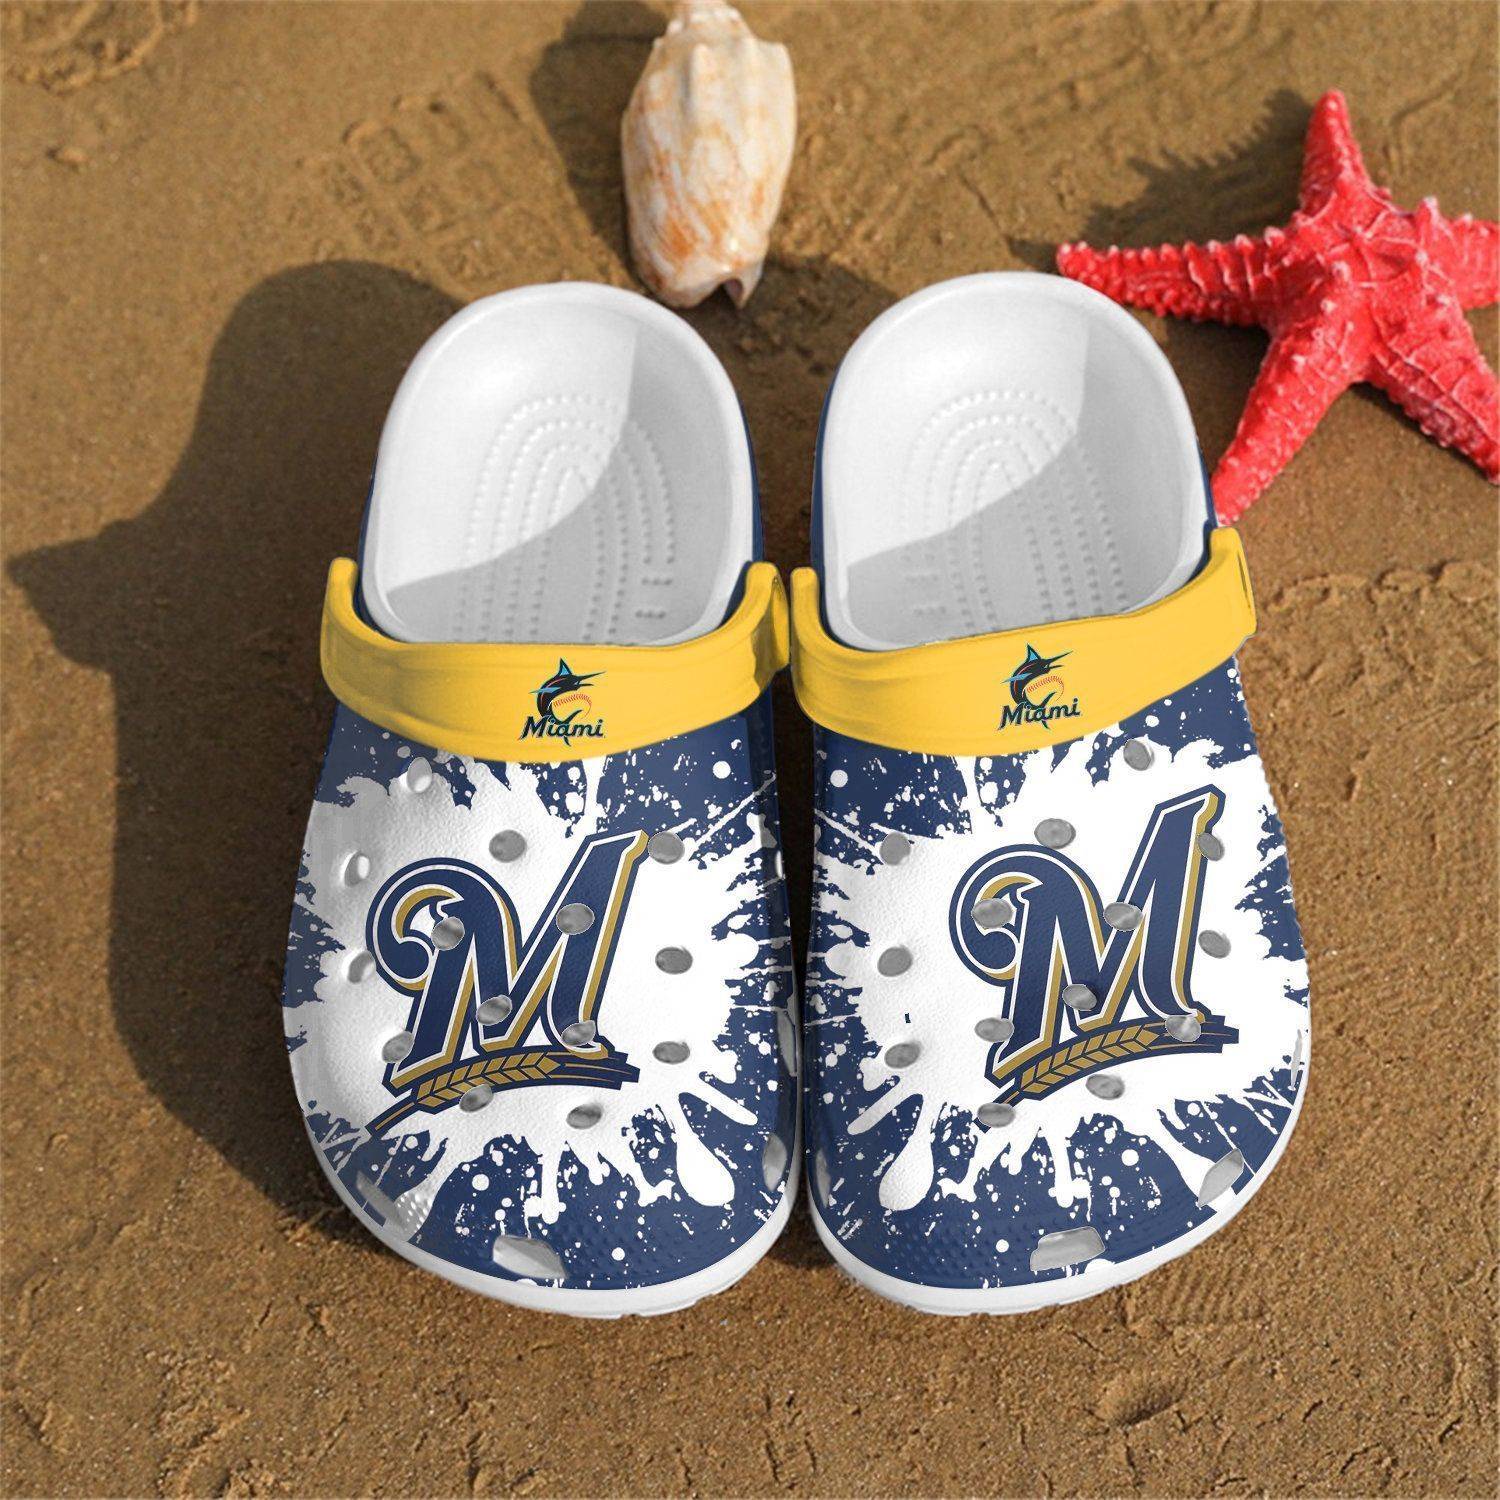 Milwaukee Brewers Mlb Paint Flakes Crocss Clog Shoescrocband Clogs Comfy Footwea